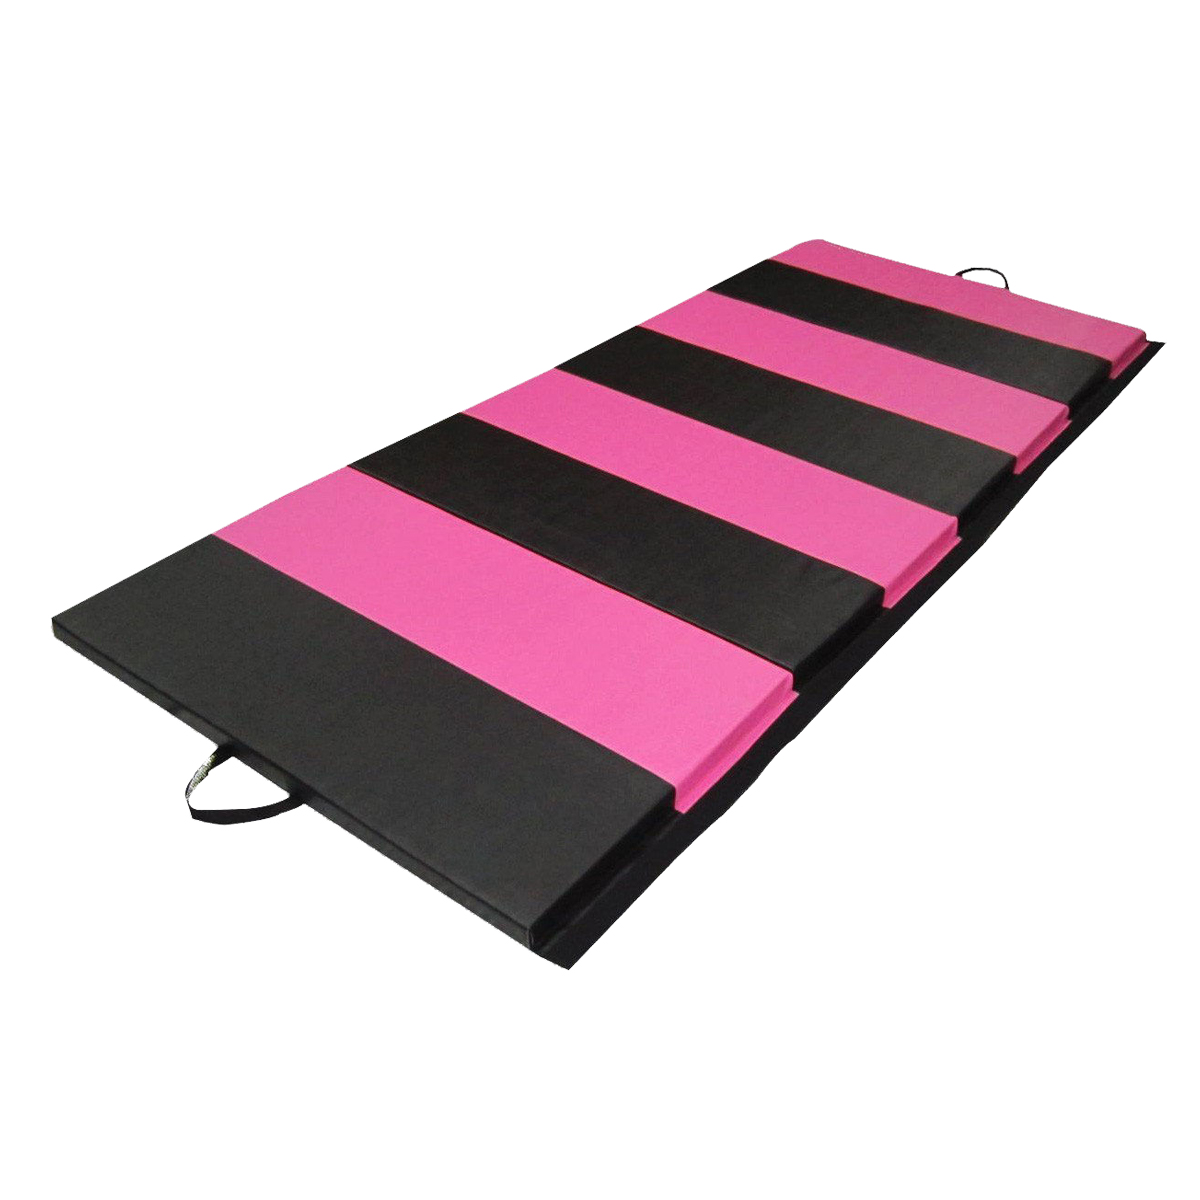 70x47x197inch-Foldable-Gymnastic-Mat-Exercise-Yoga-Fitness-Workout-Tumbling-Pad-1245140-8